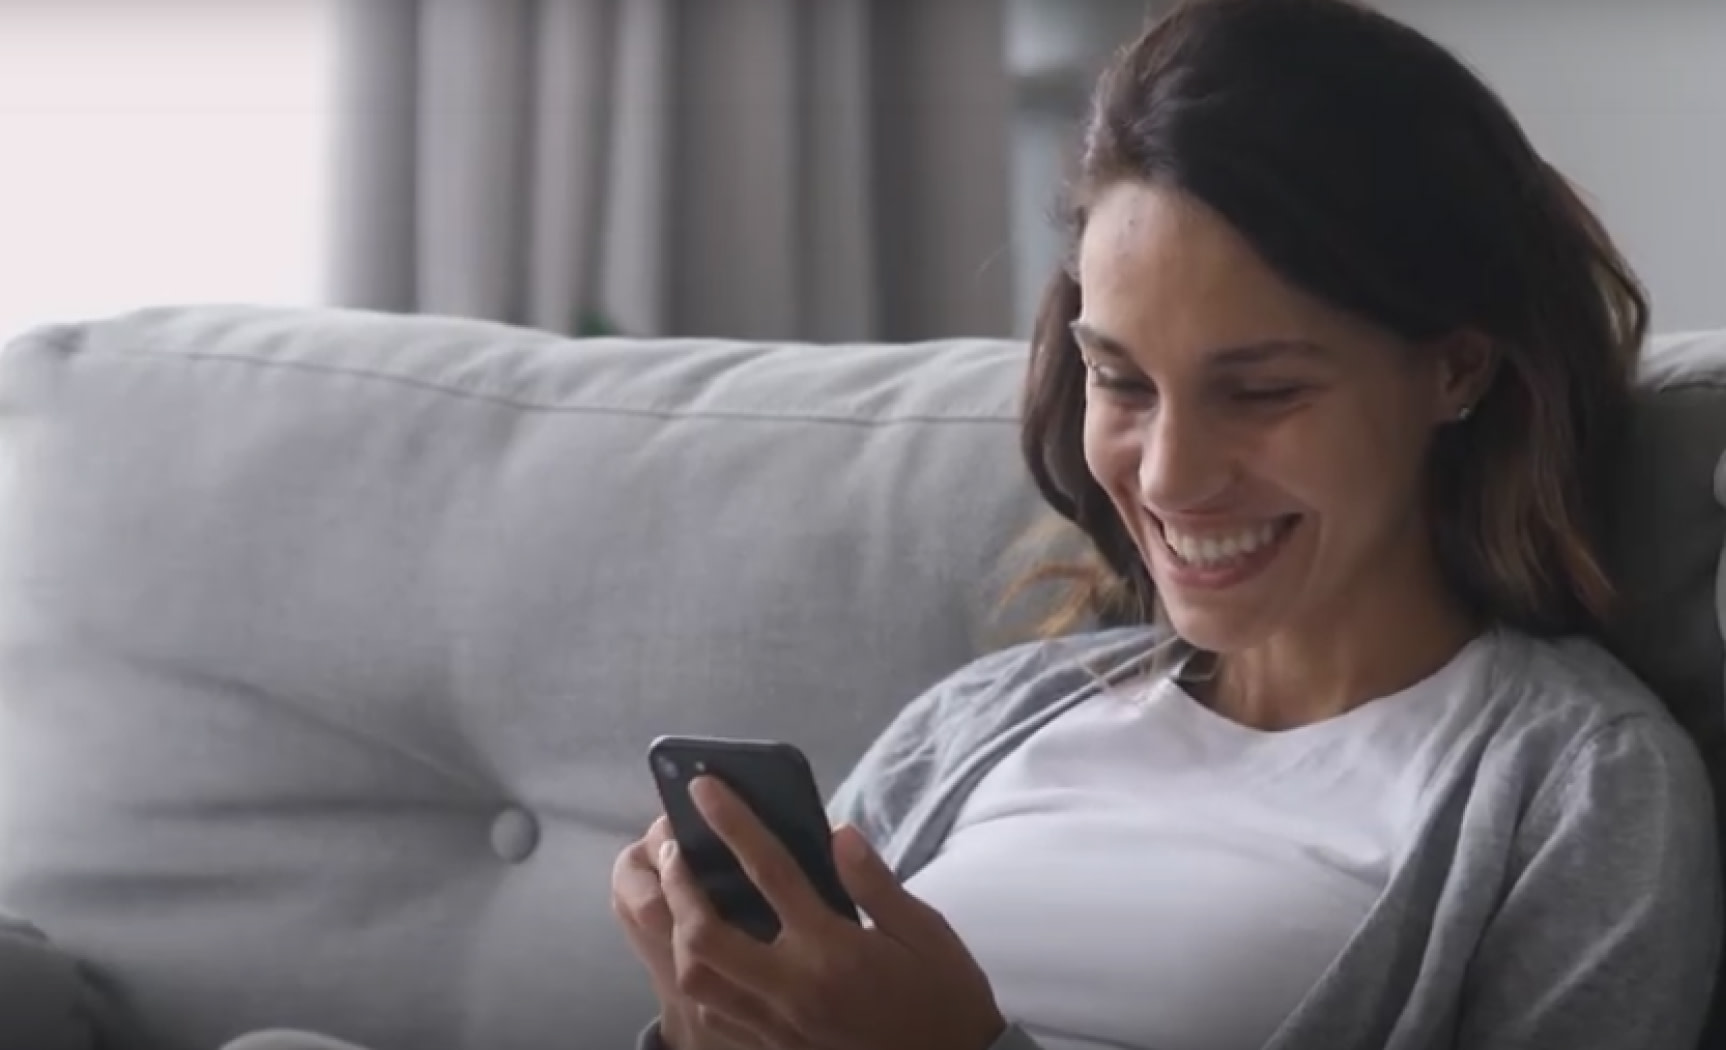 Smiling girl looking at the phone and wearing her transparent aligners